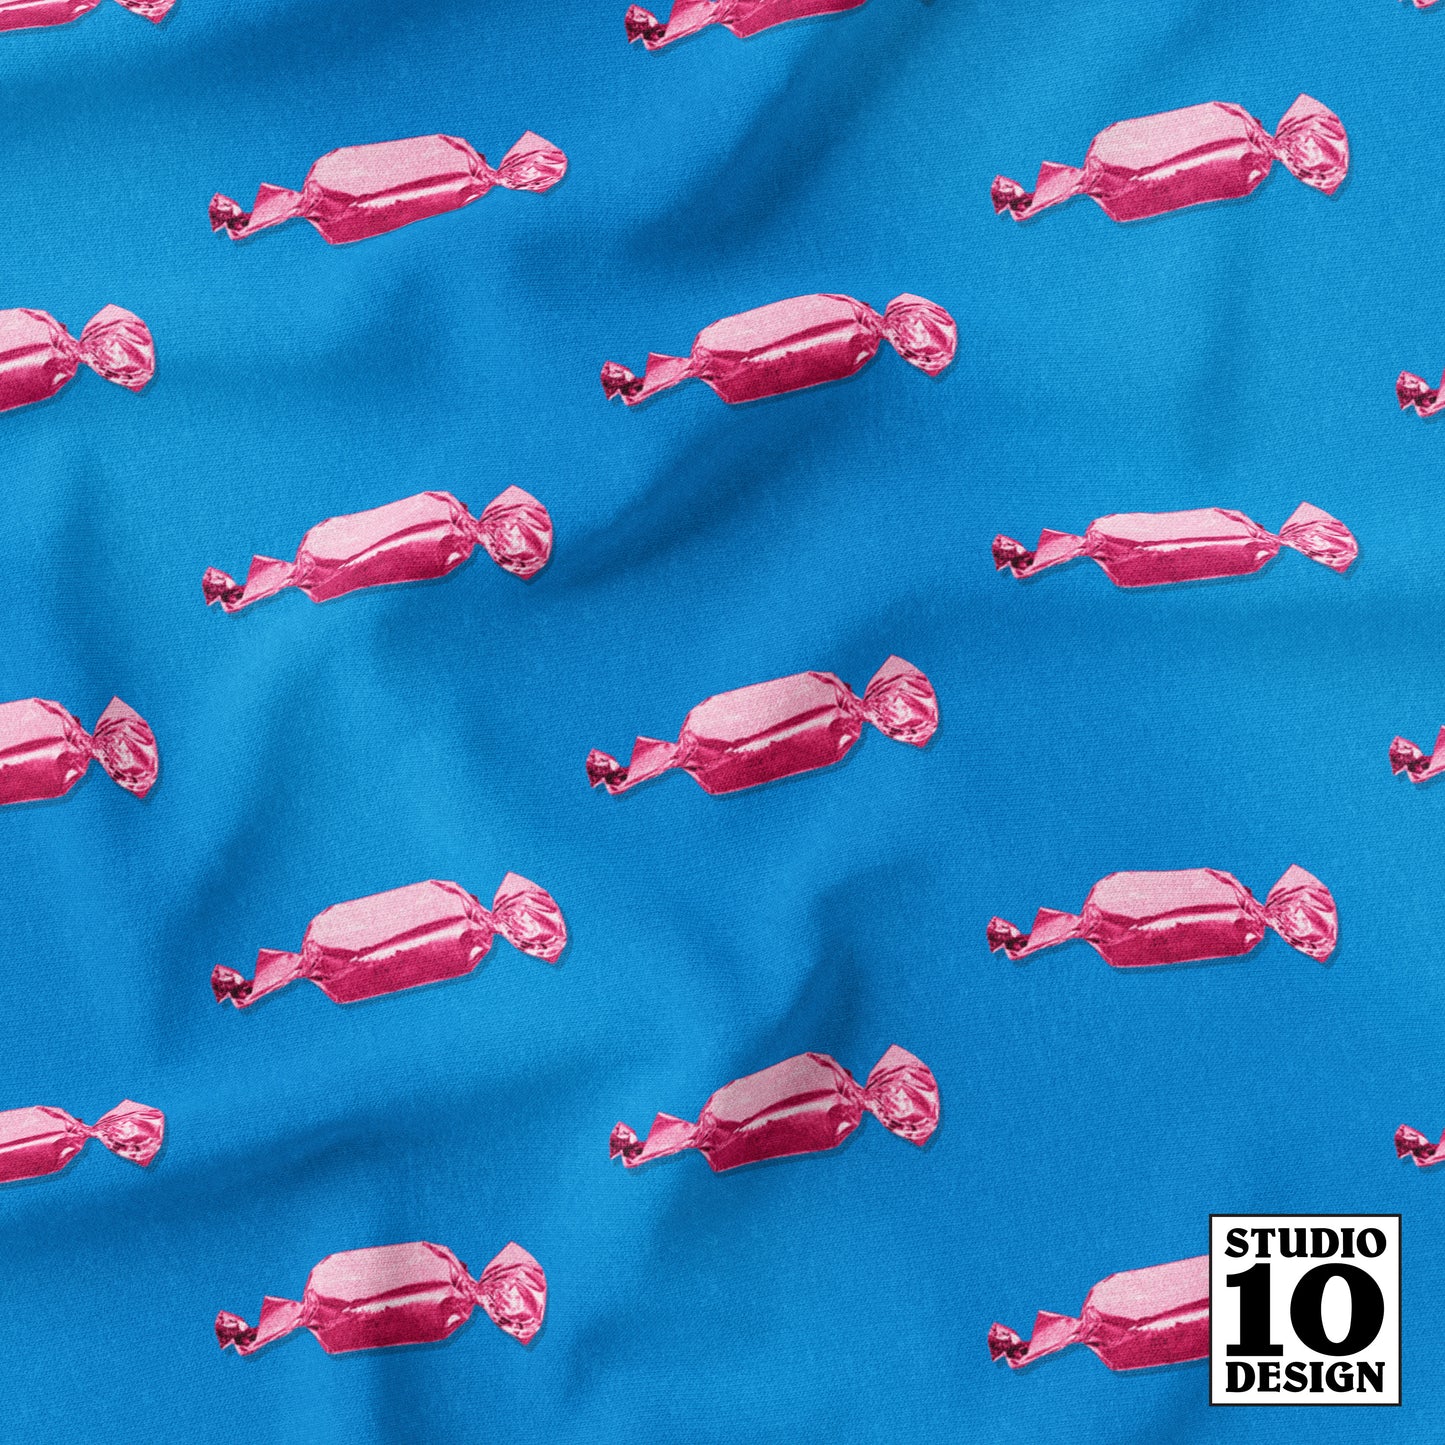 Hard Candy, Pink & Blue Printed Fabric by Studio Ten Design